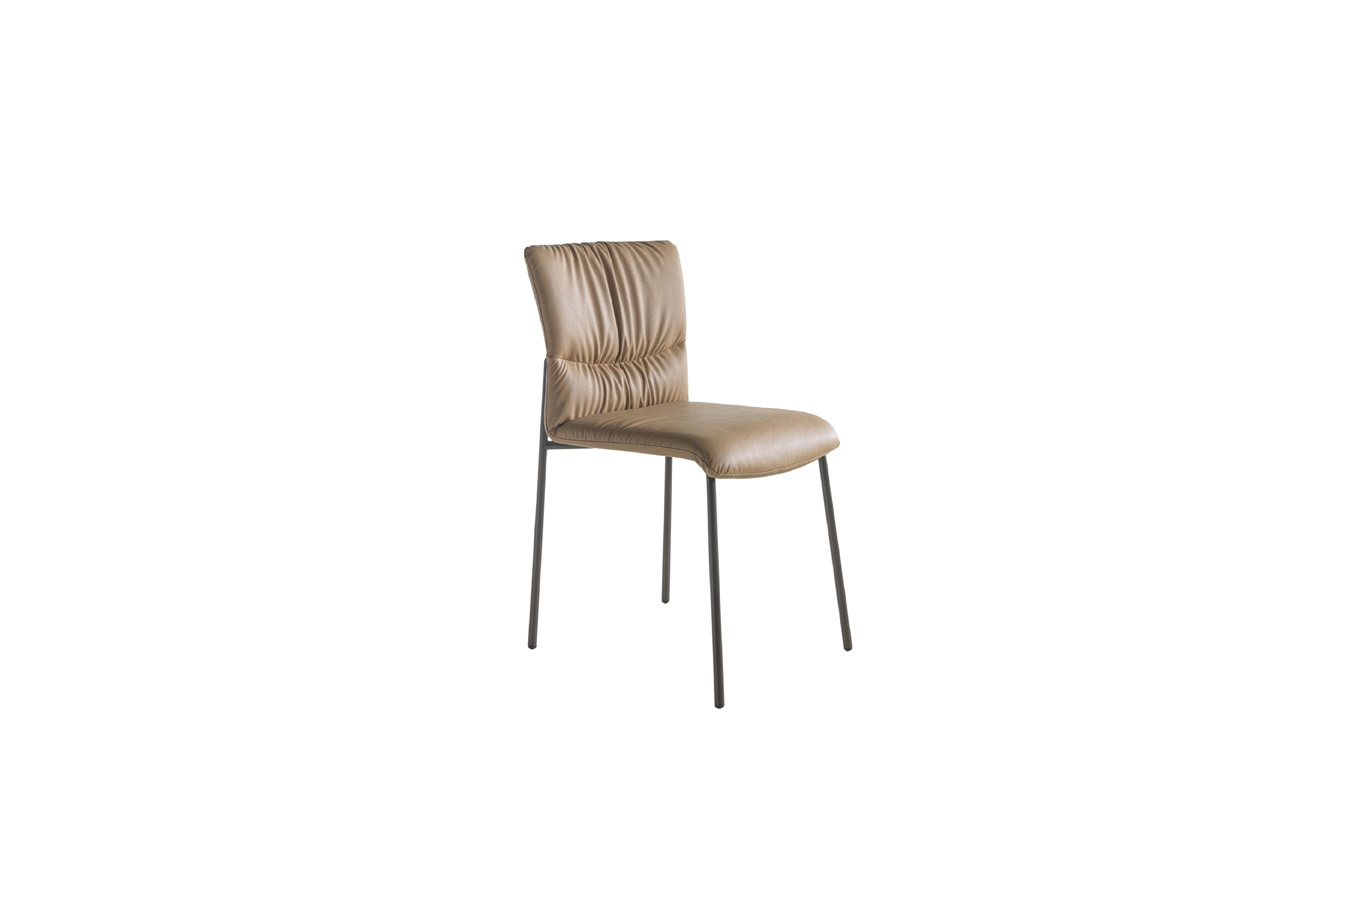 Lago Dining Room Chair Woop Chair 01